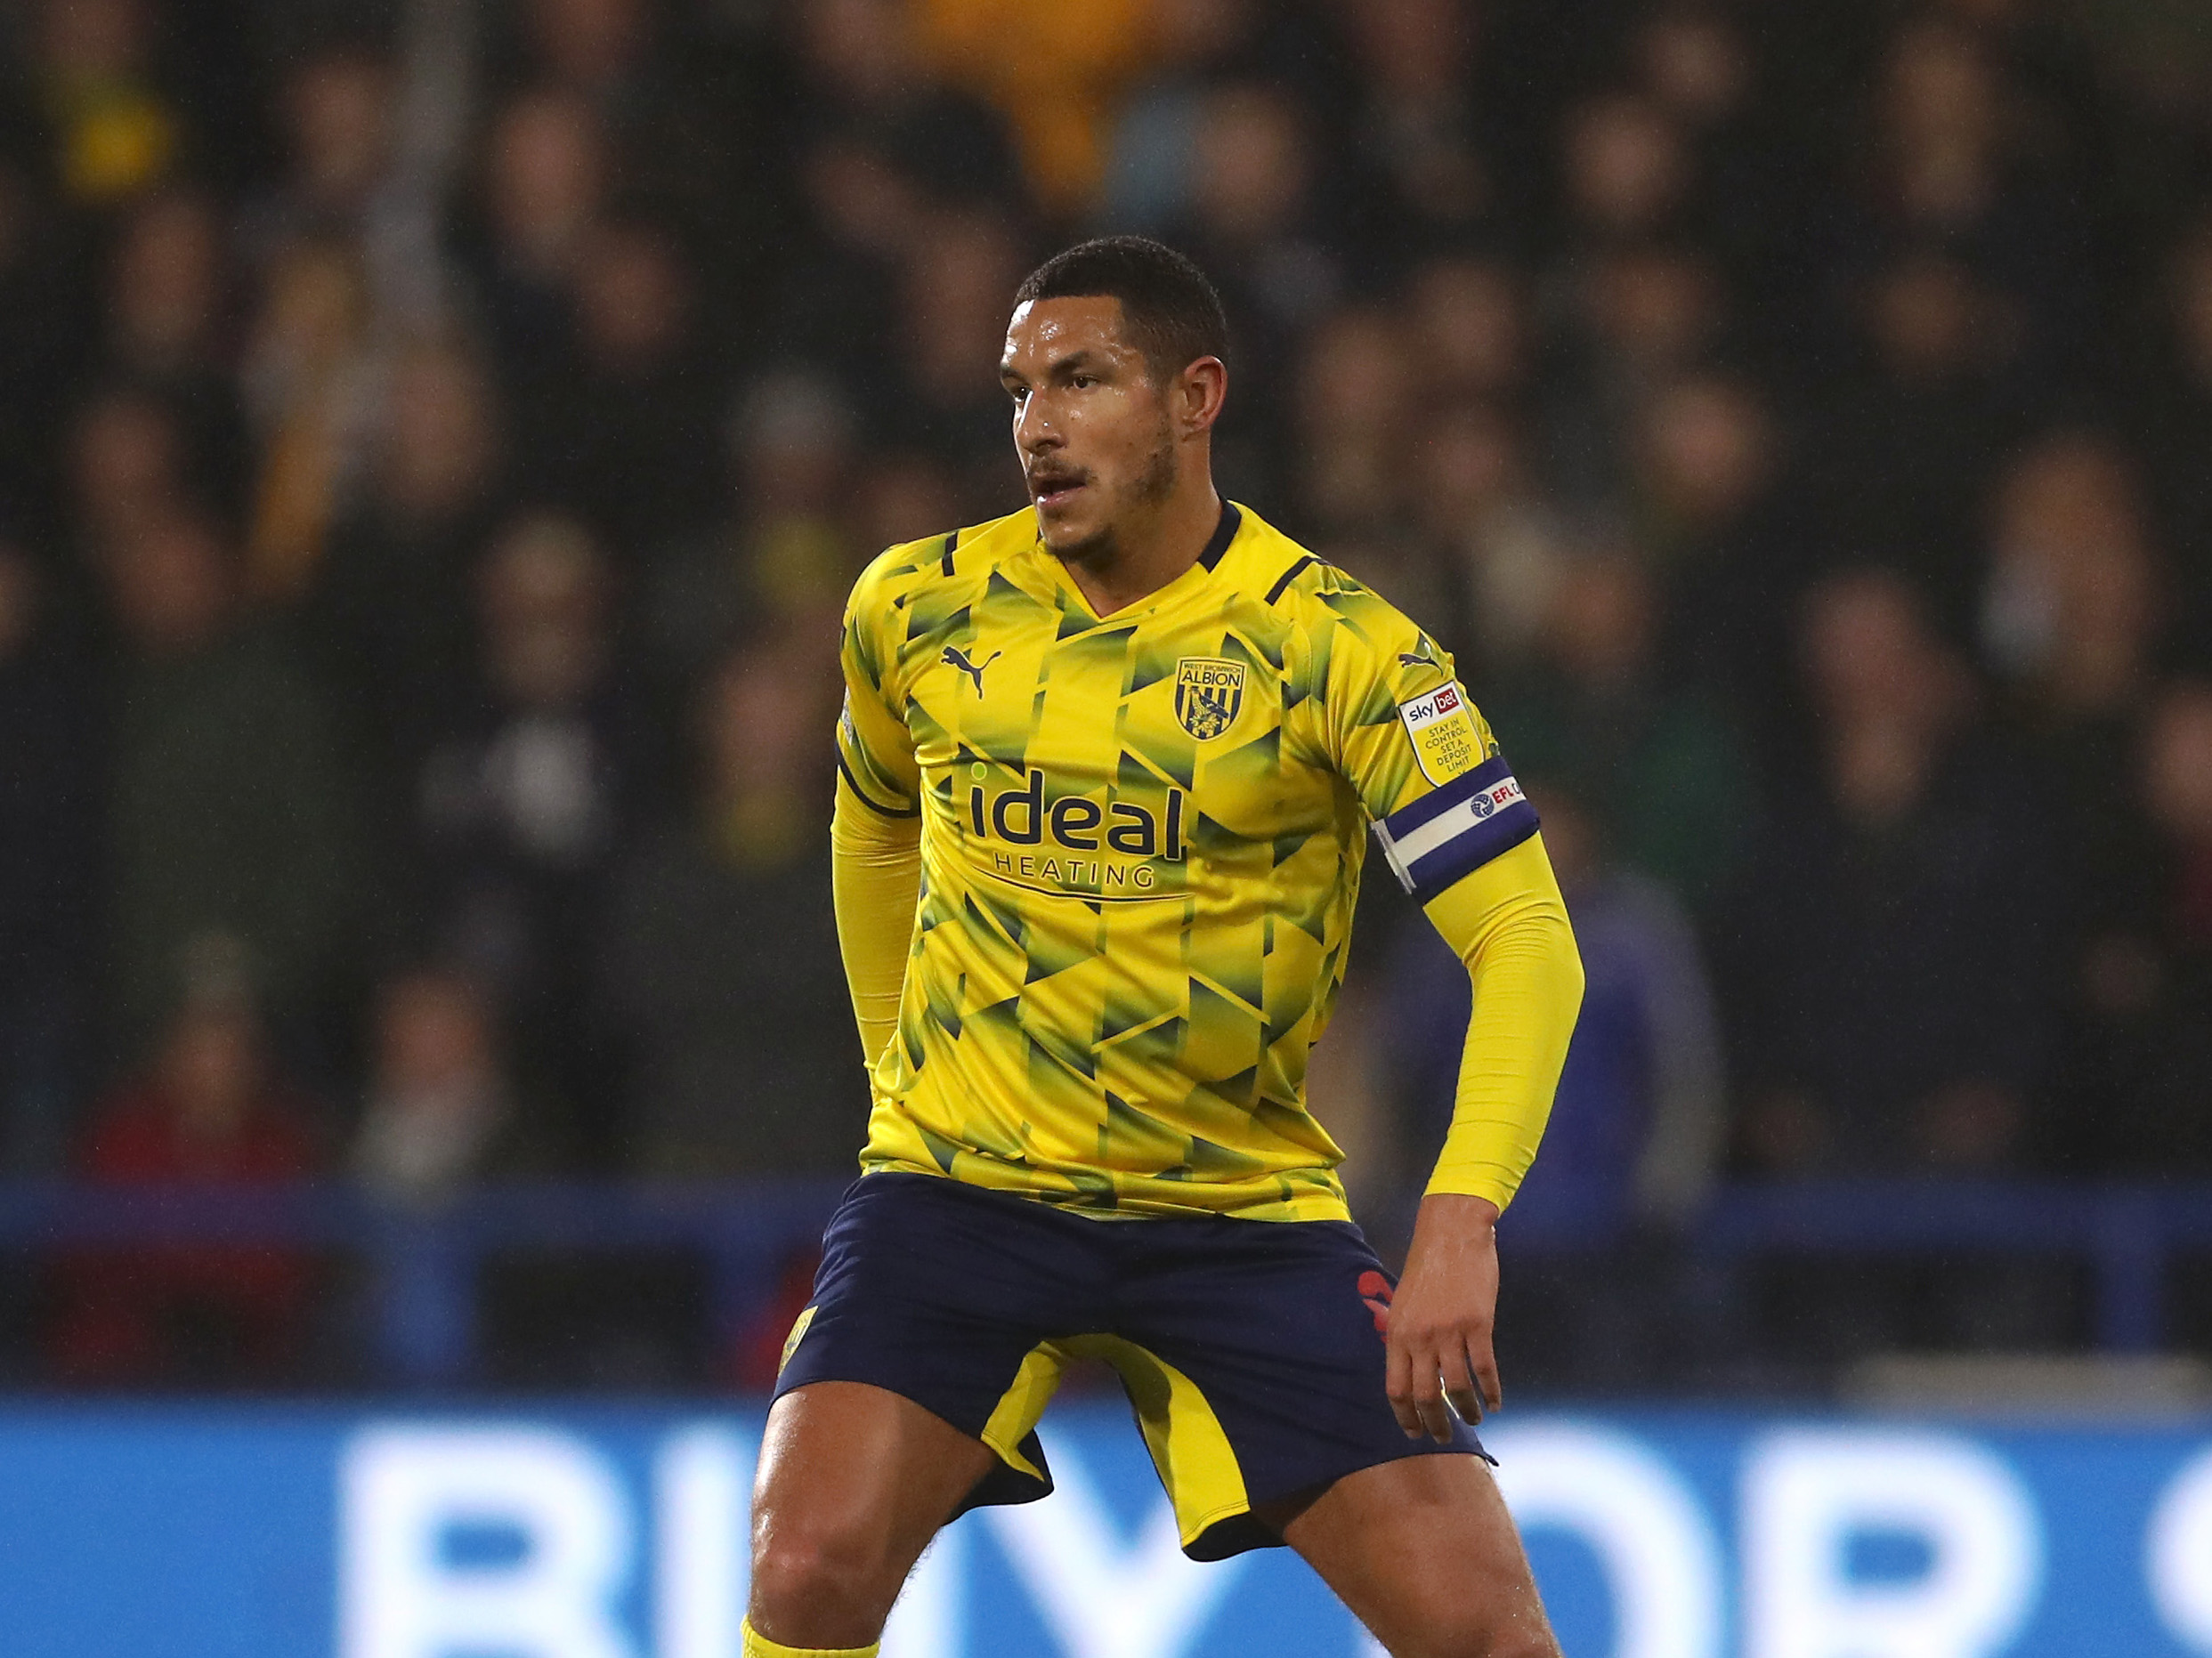 West Bromwich Albion will appeal against the red card shown to Jake Livermore in the Sky Bet Championship defeat at Huddersfield Town